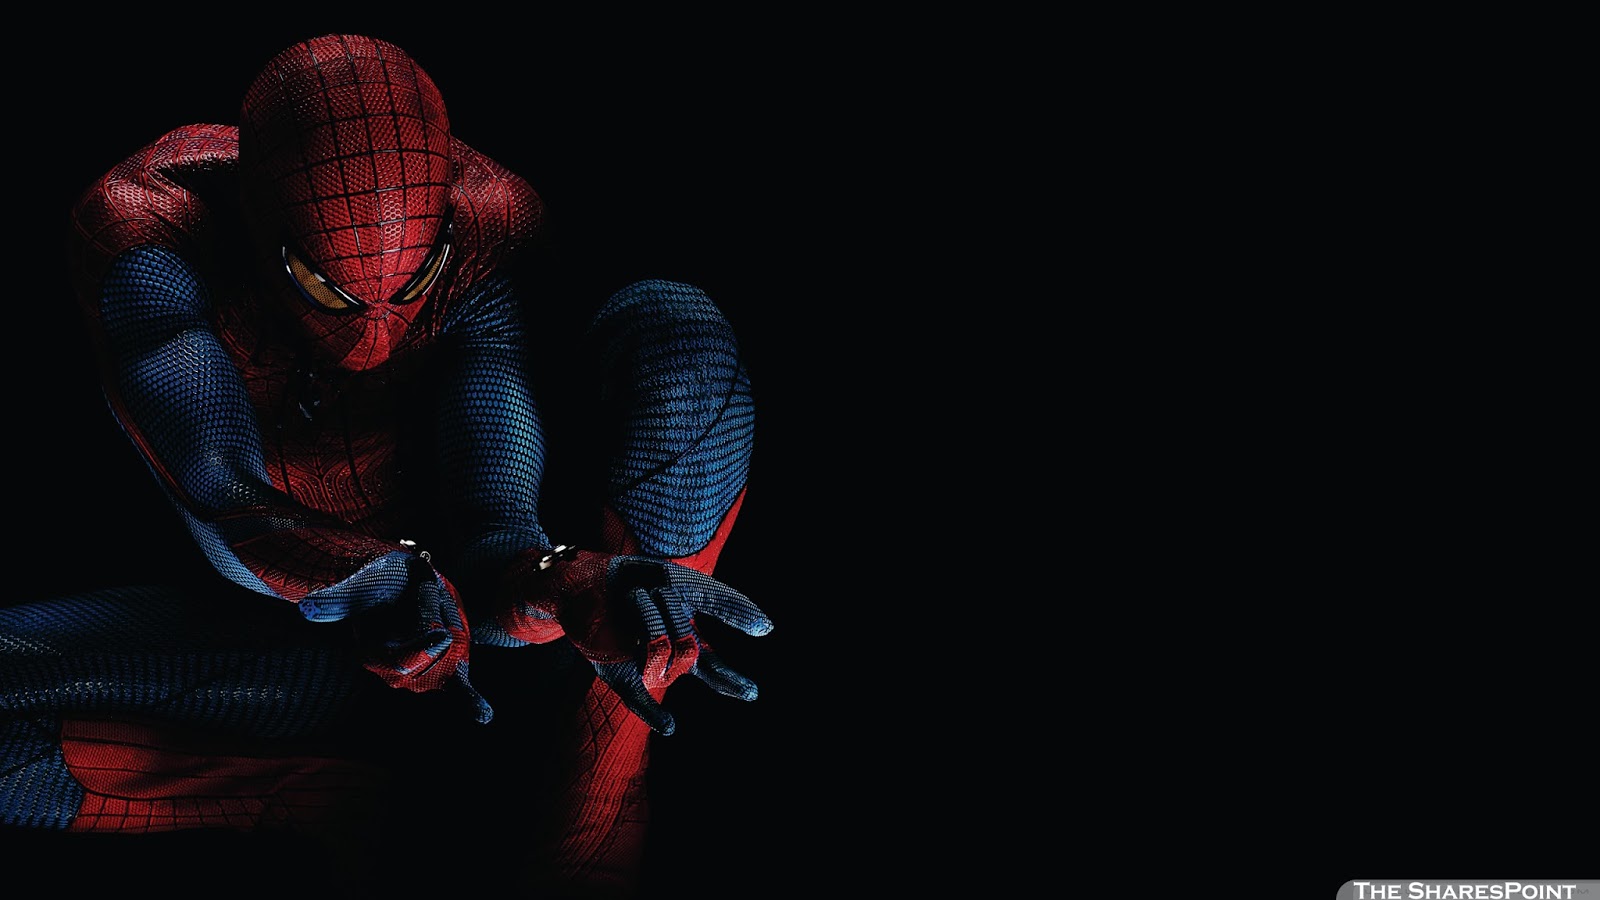 The Amazing Spider-Man Wallpaper 1080p Download